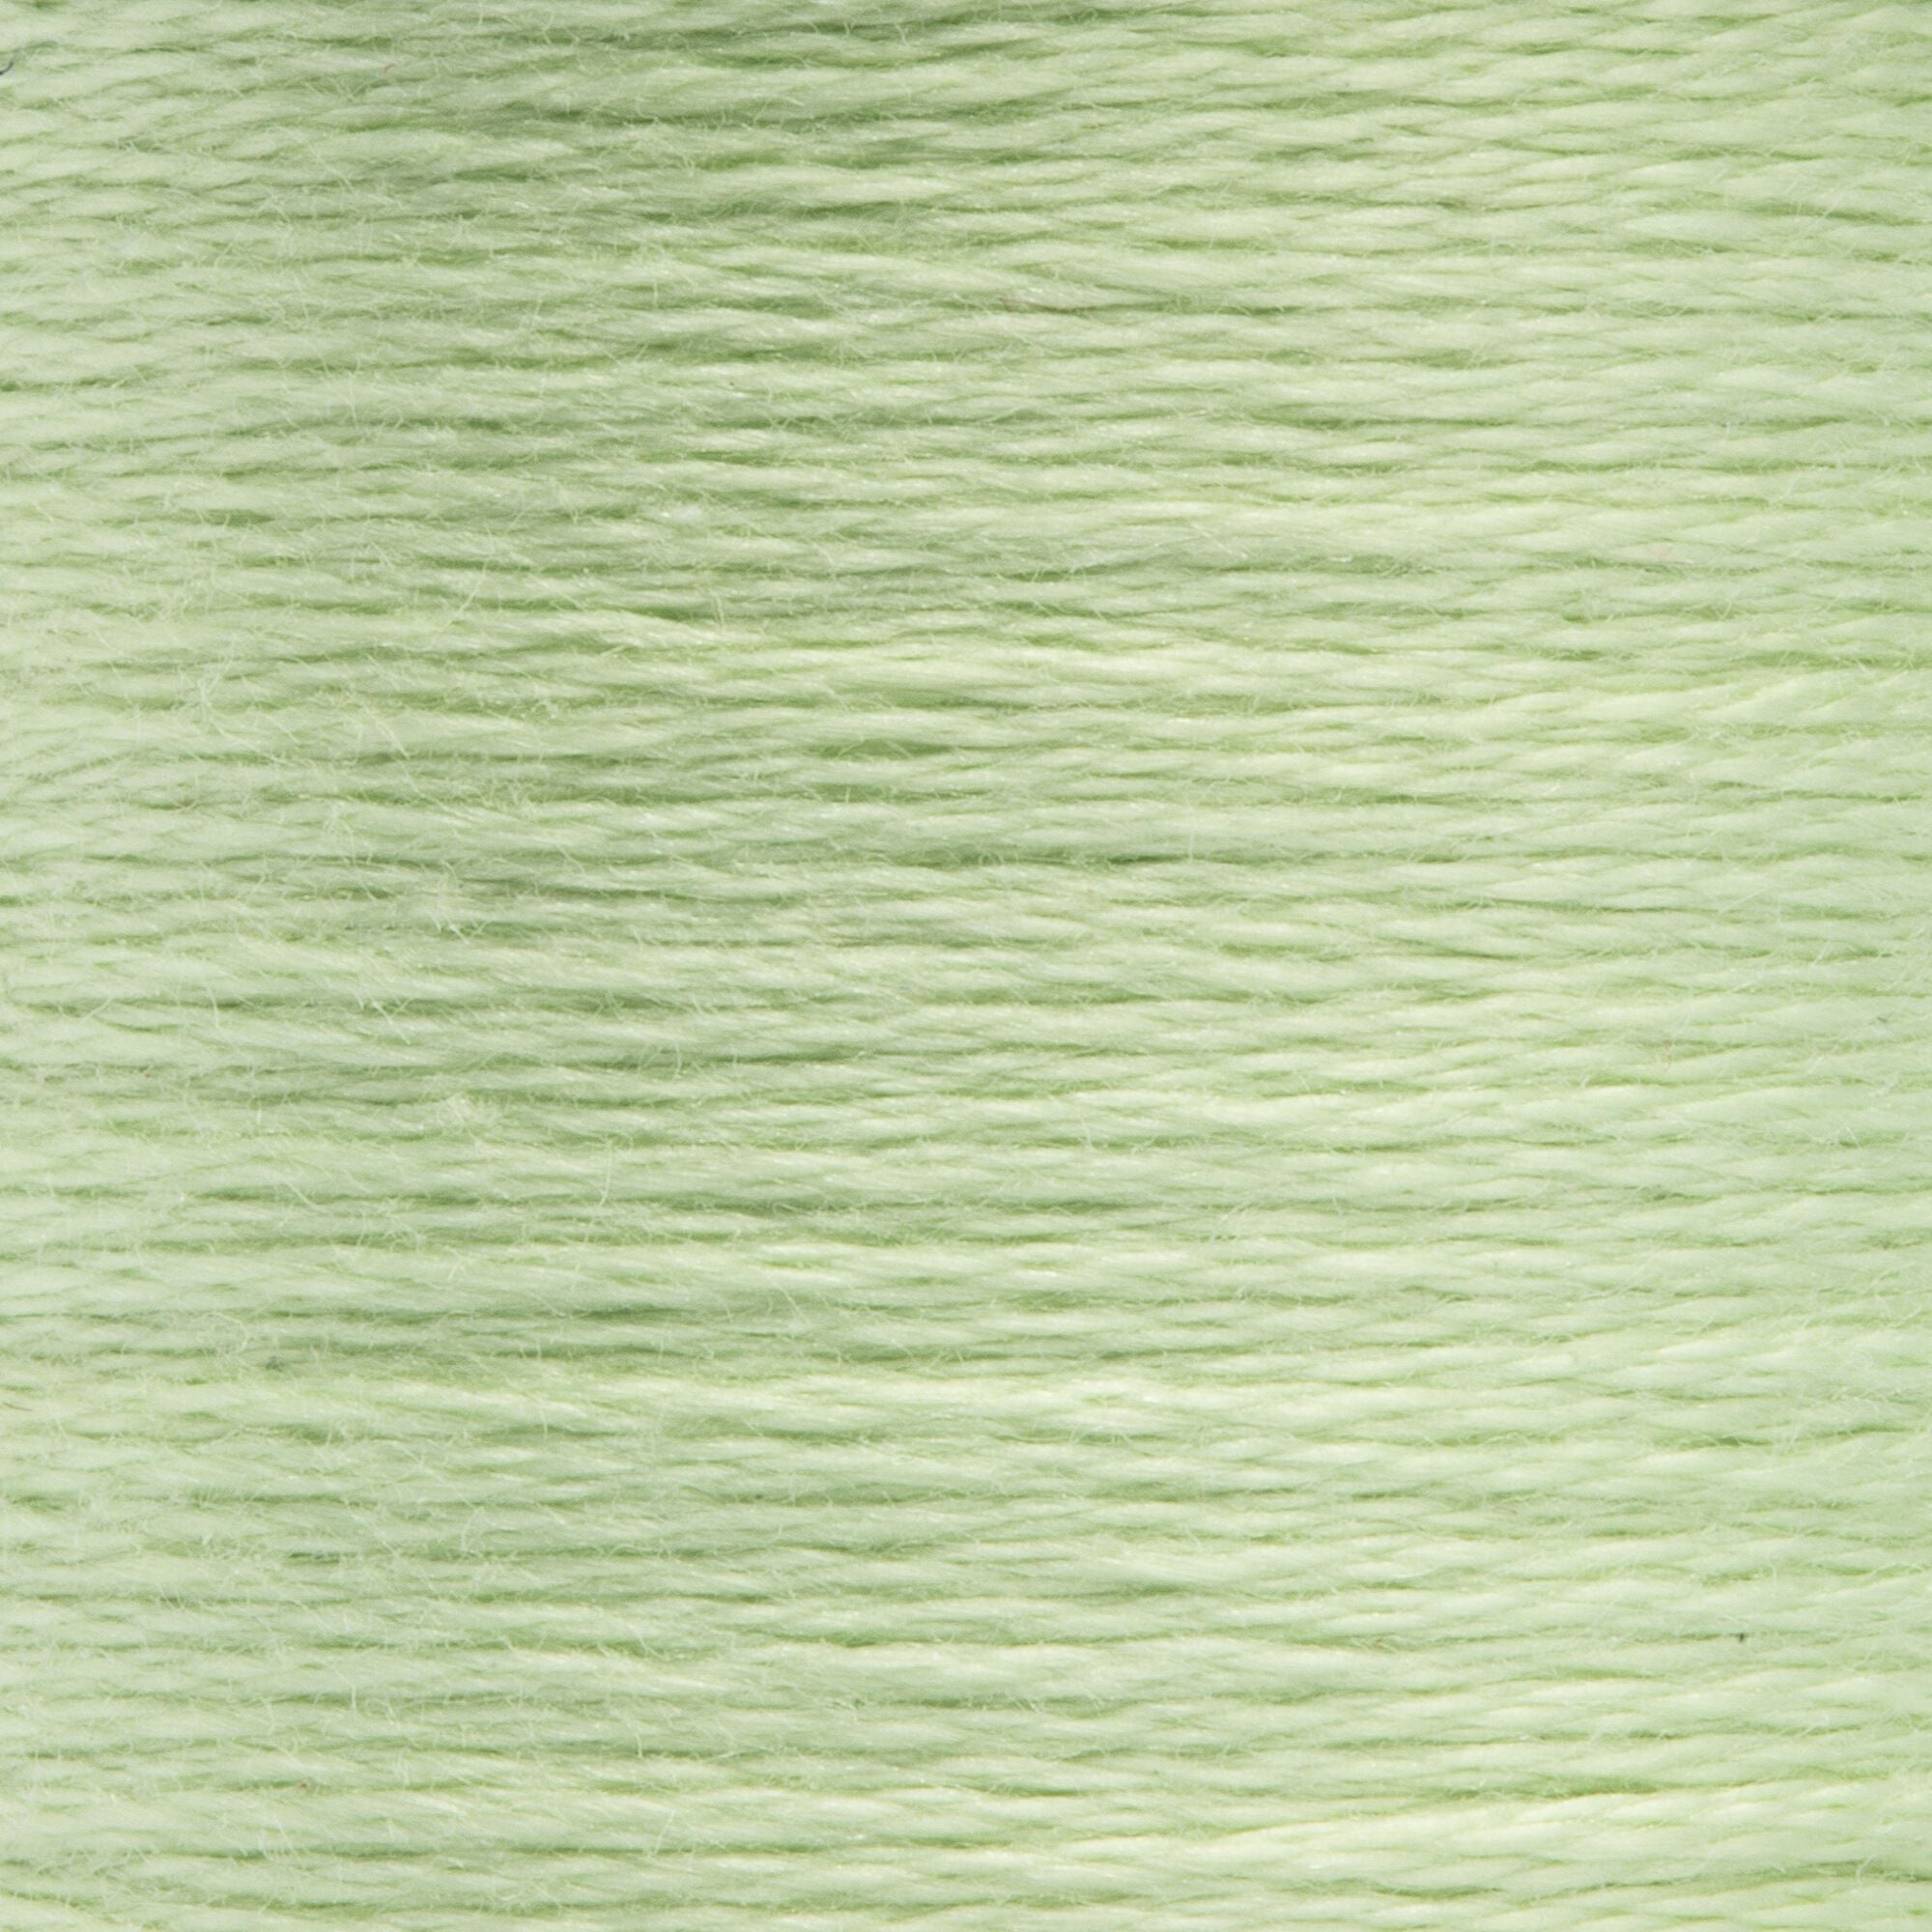 Anchor Embroidery Floss in Grass Green Vy Lt